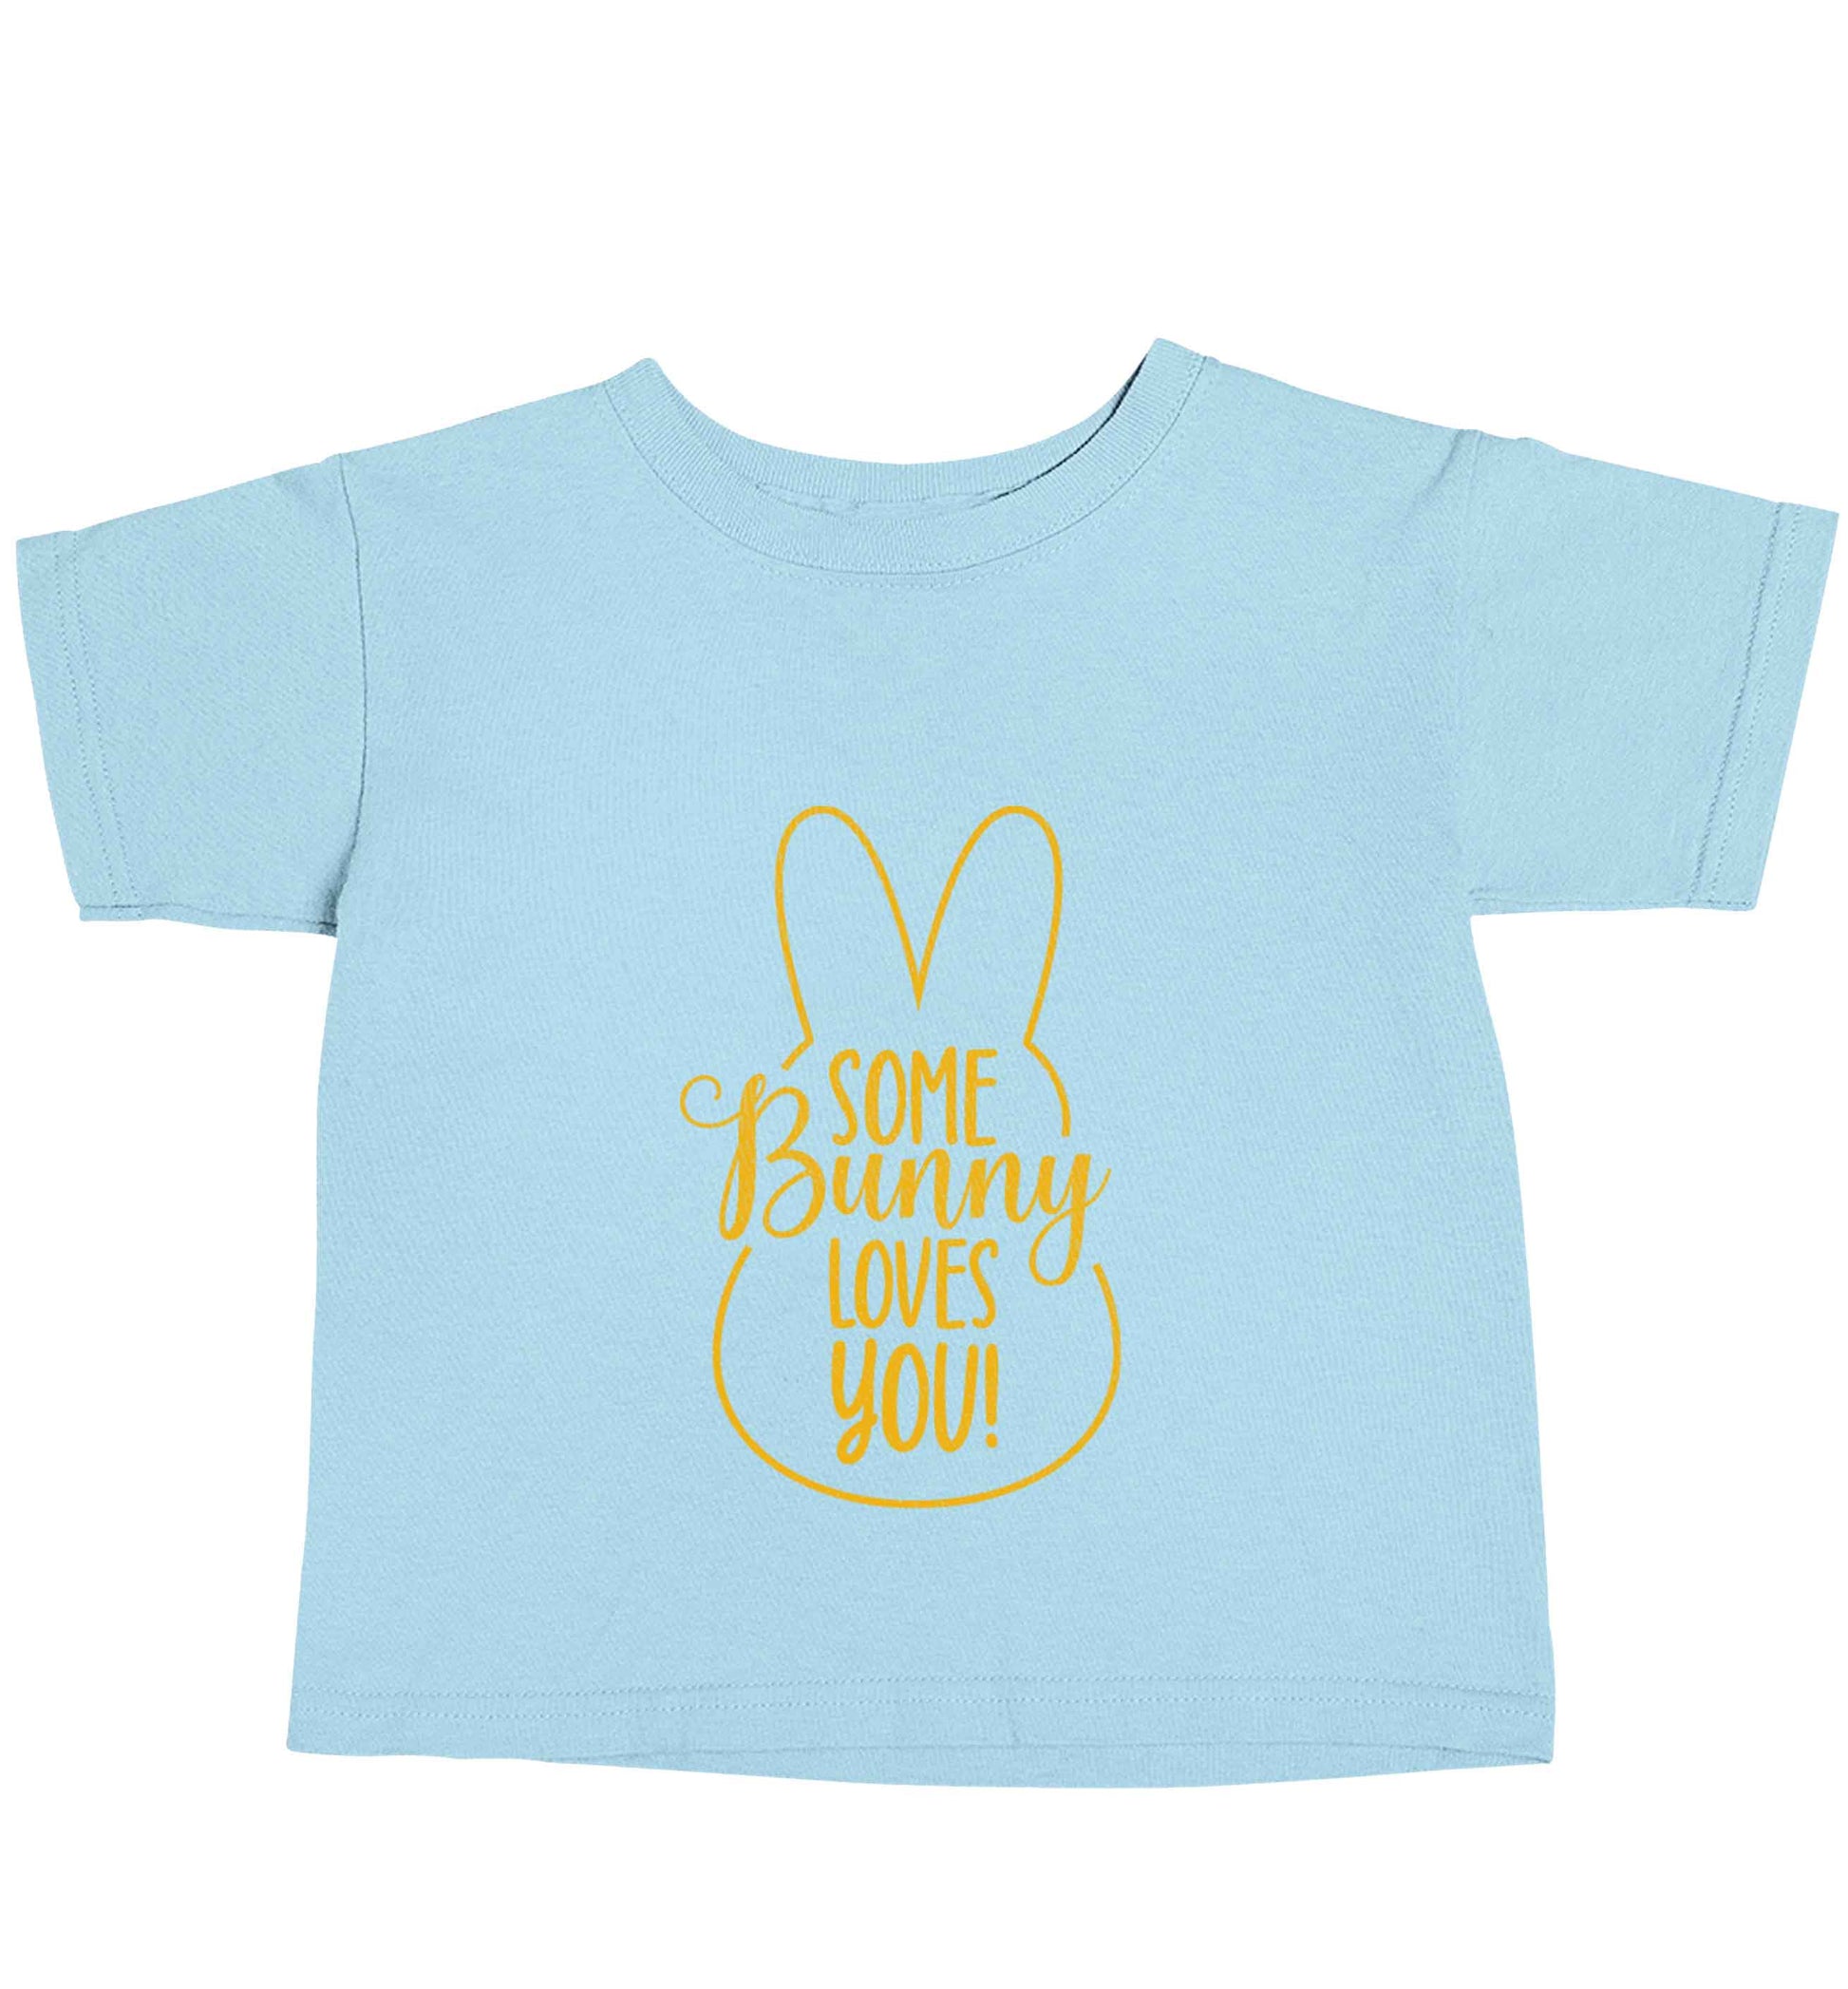 Some bunny loves you light blue baby toddler Tshirt 2 Years